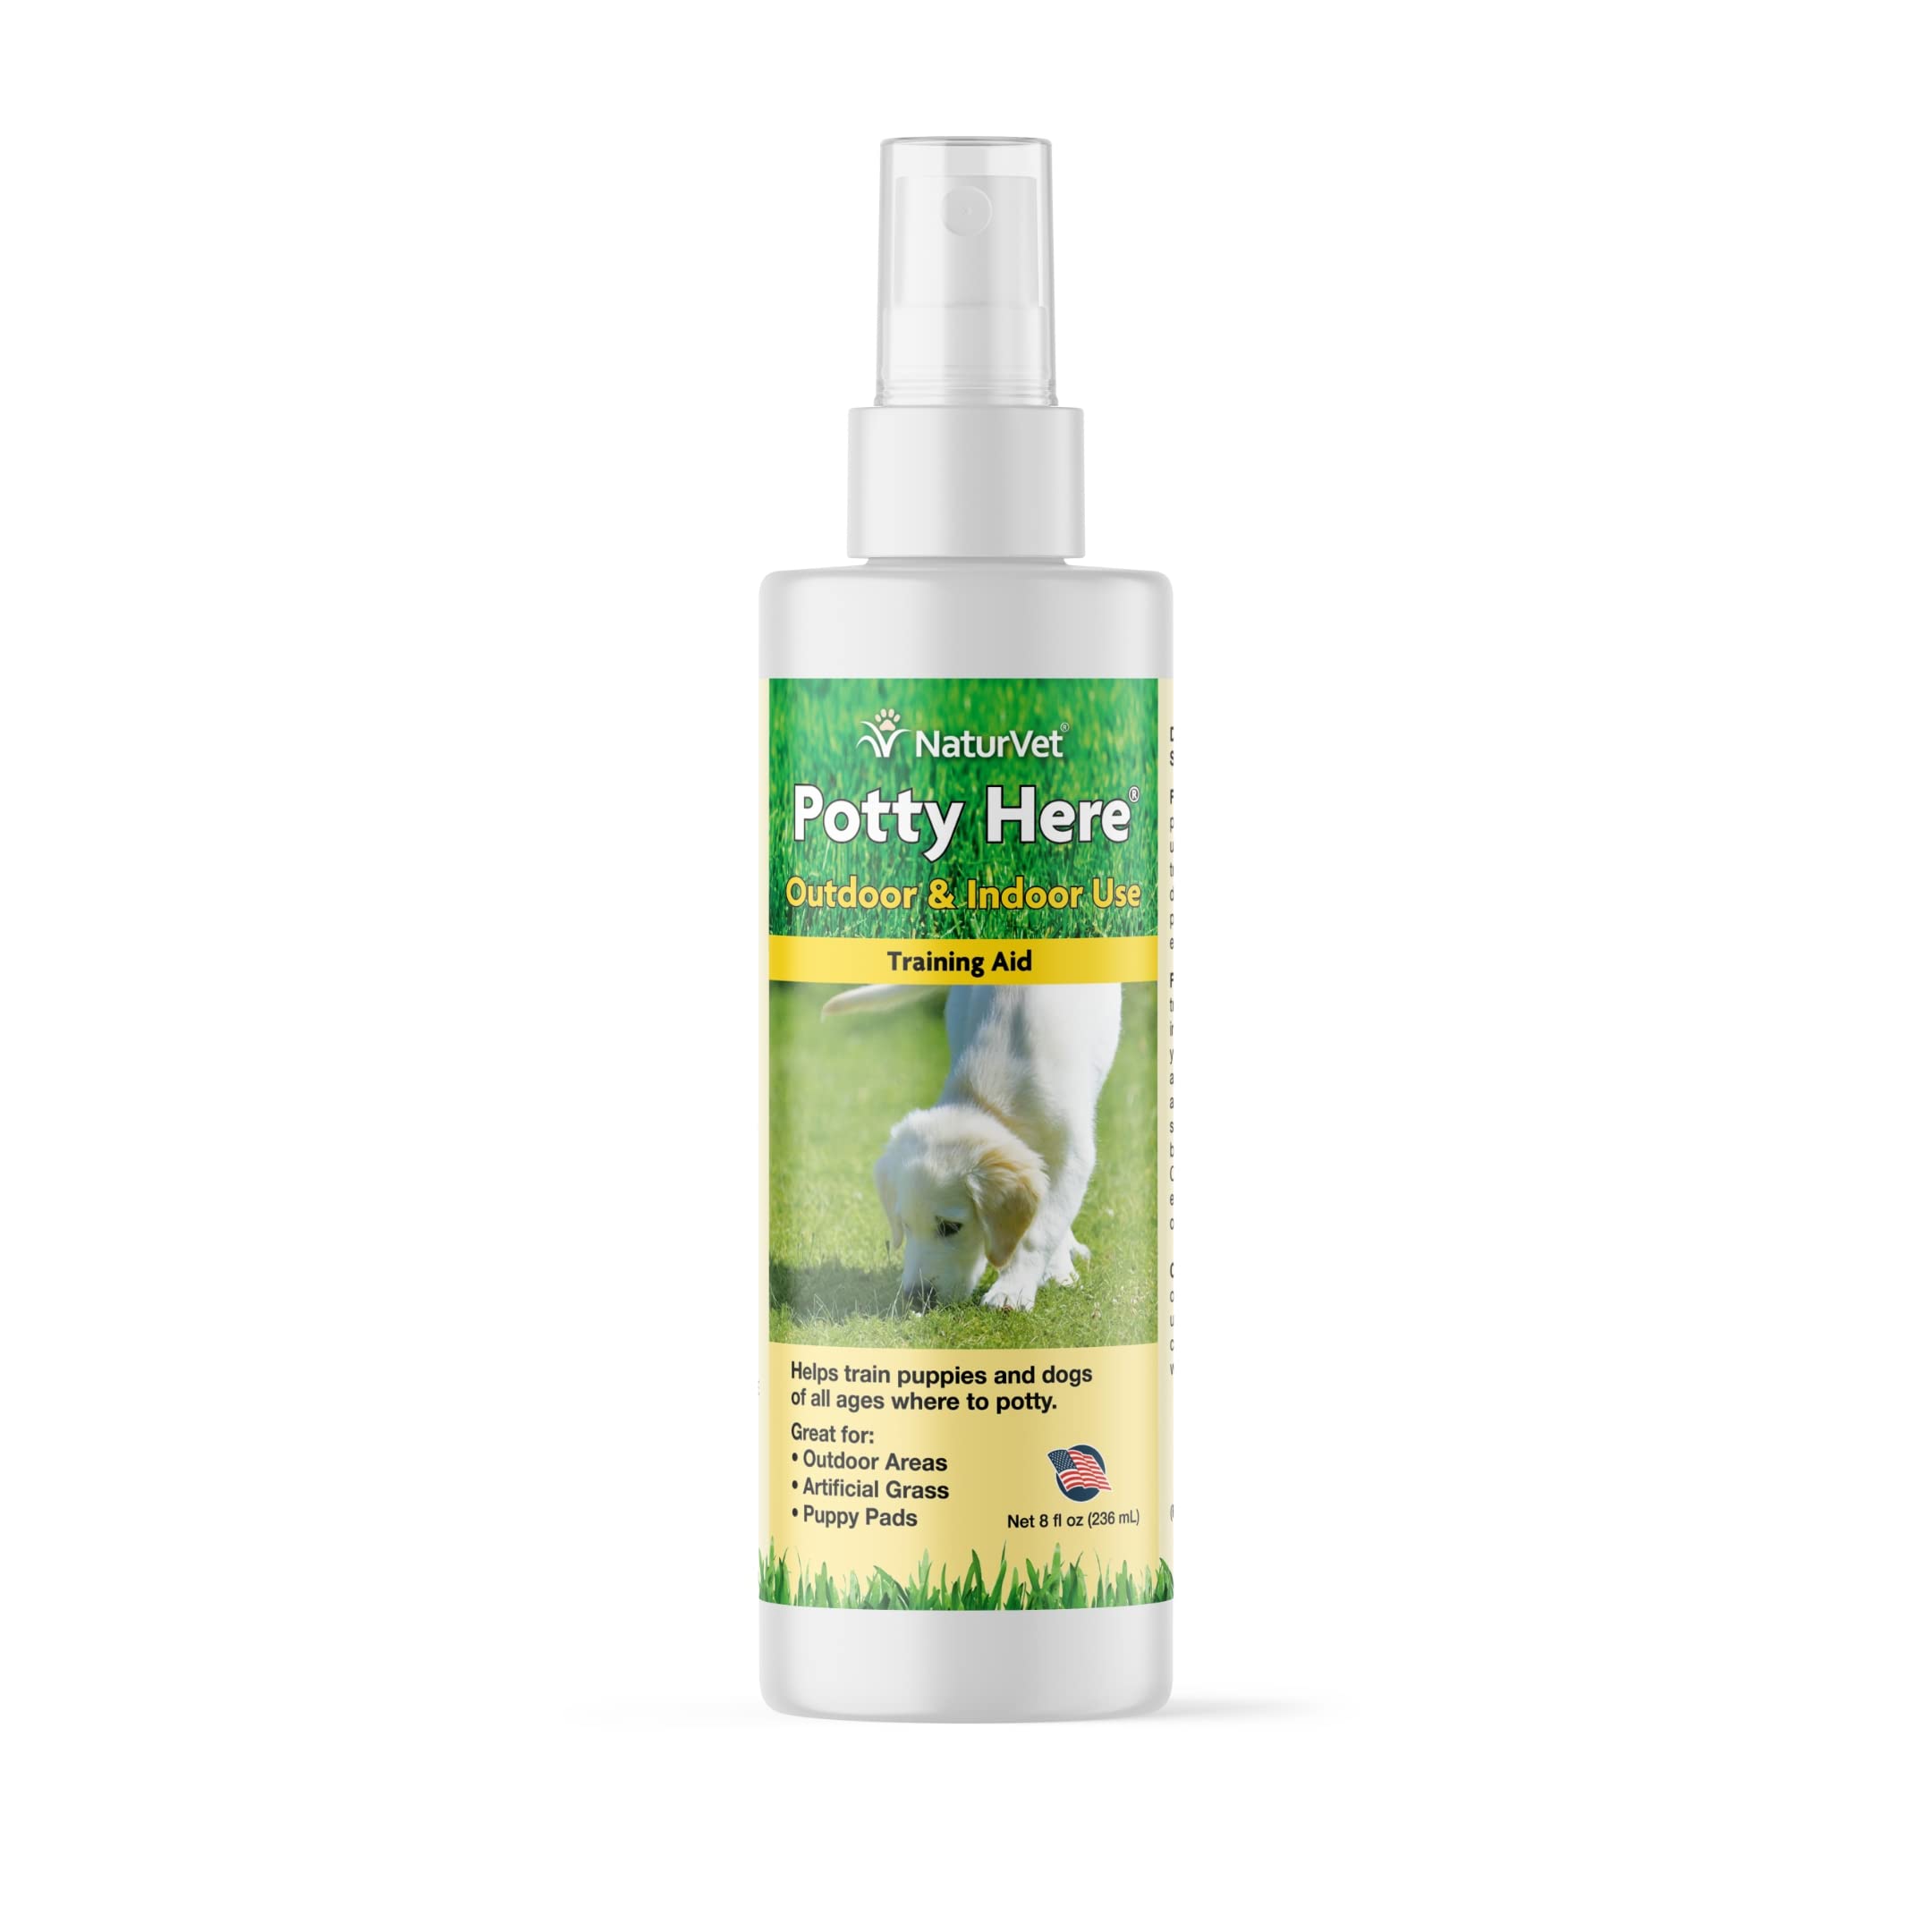 Book Cover NaturVet – Potty Here Training Aid Spray | Attractive Scent Helps Train Puppies & Dogs Where to Potty | Formulated for Indoor & Outdoor Use | 8 oz